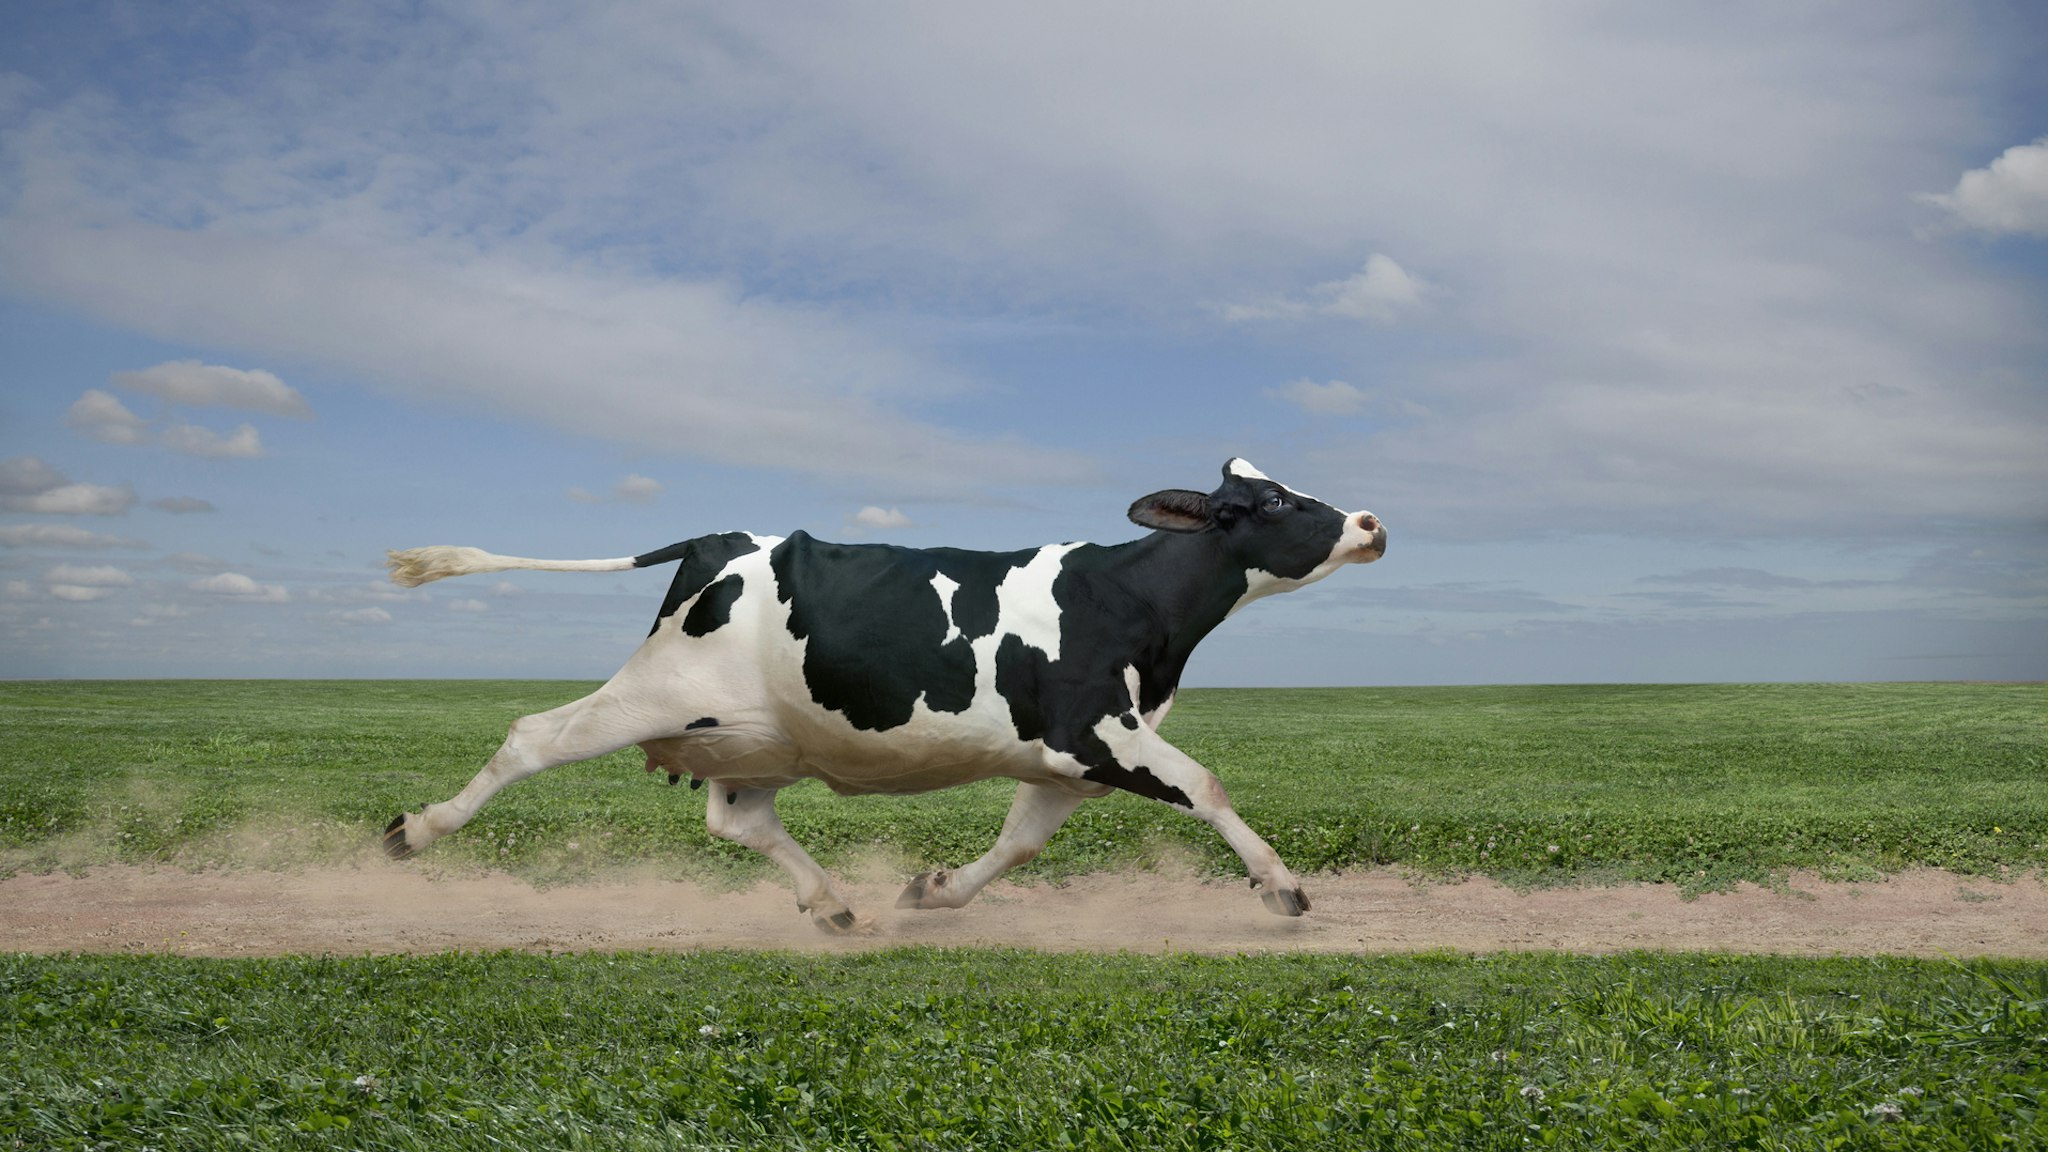 Cow running on dirt path in crop field - stock photo